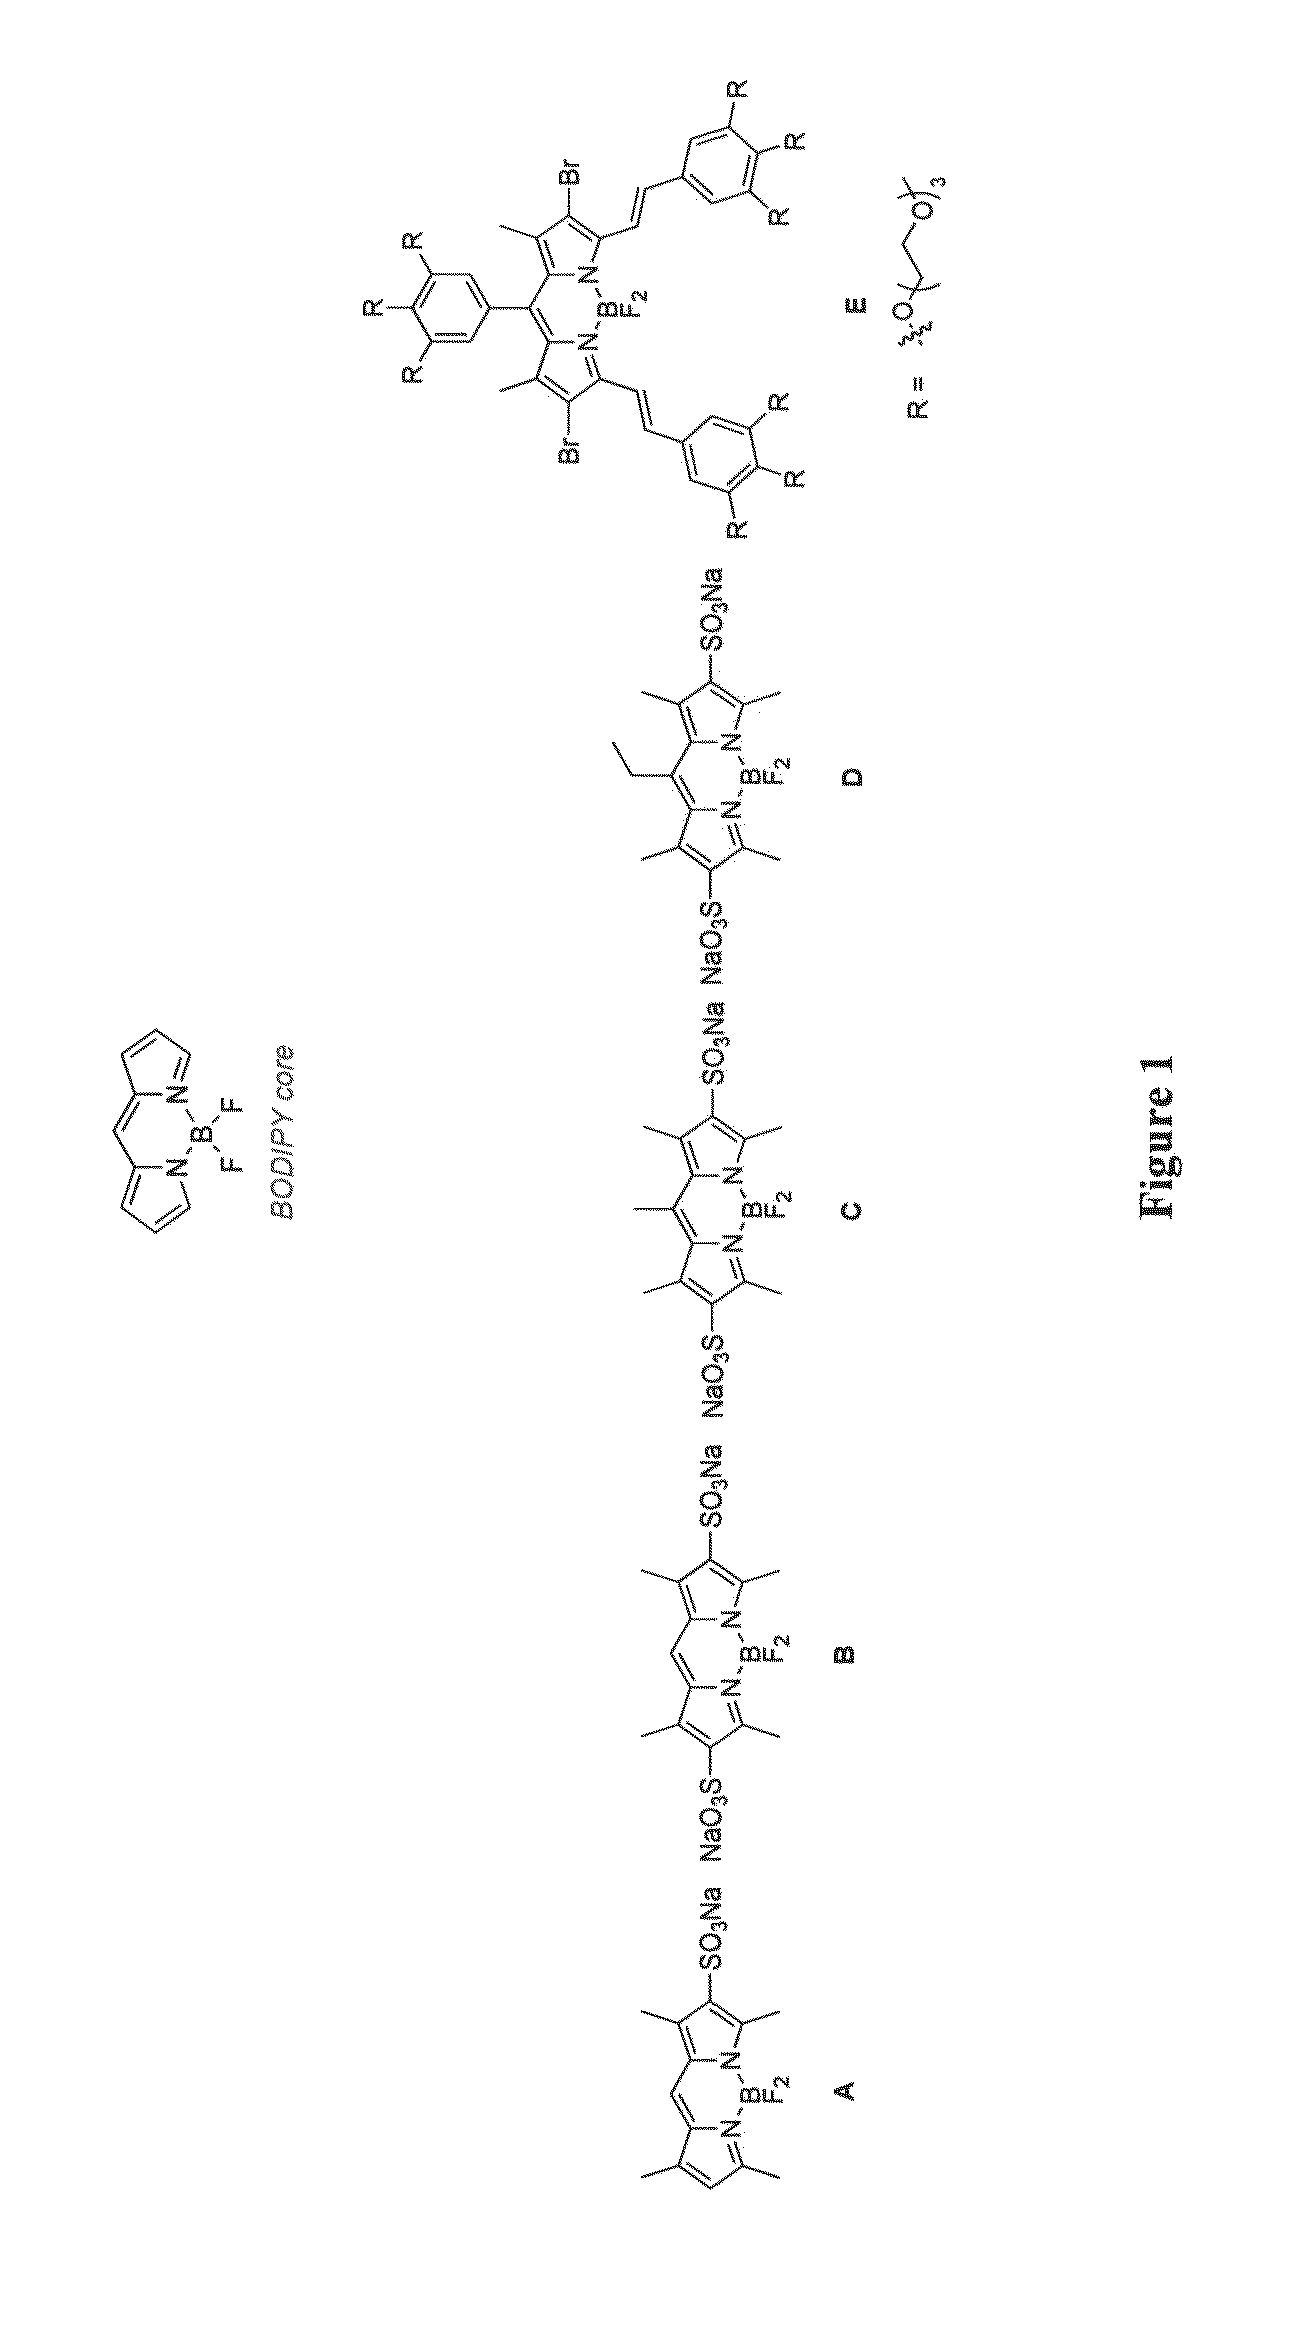 Through-bond energy transfer cassettes, systems and methods